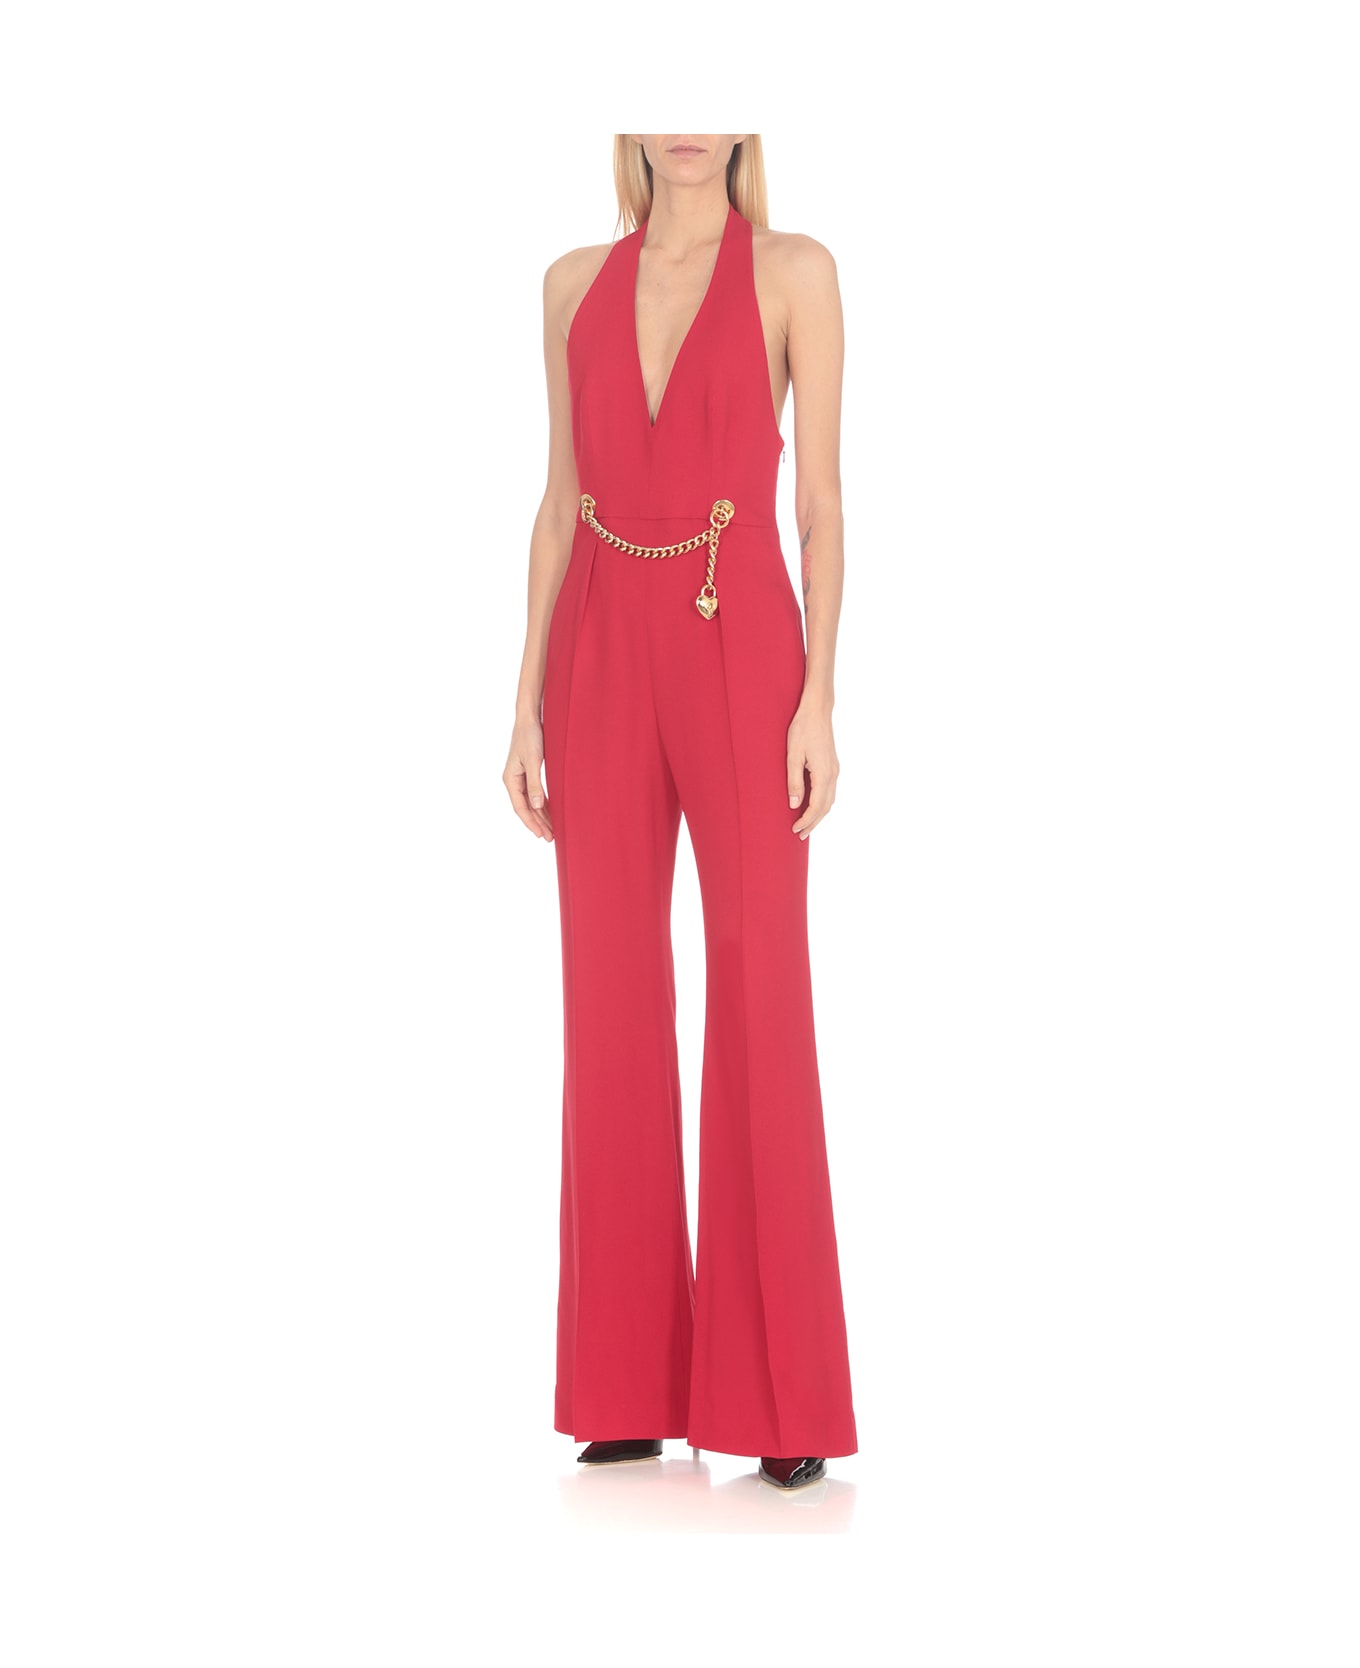 Moschino Chain And Heart Jumpsuit - Red ジャンプスーツ